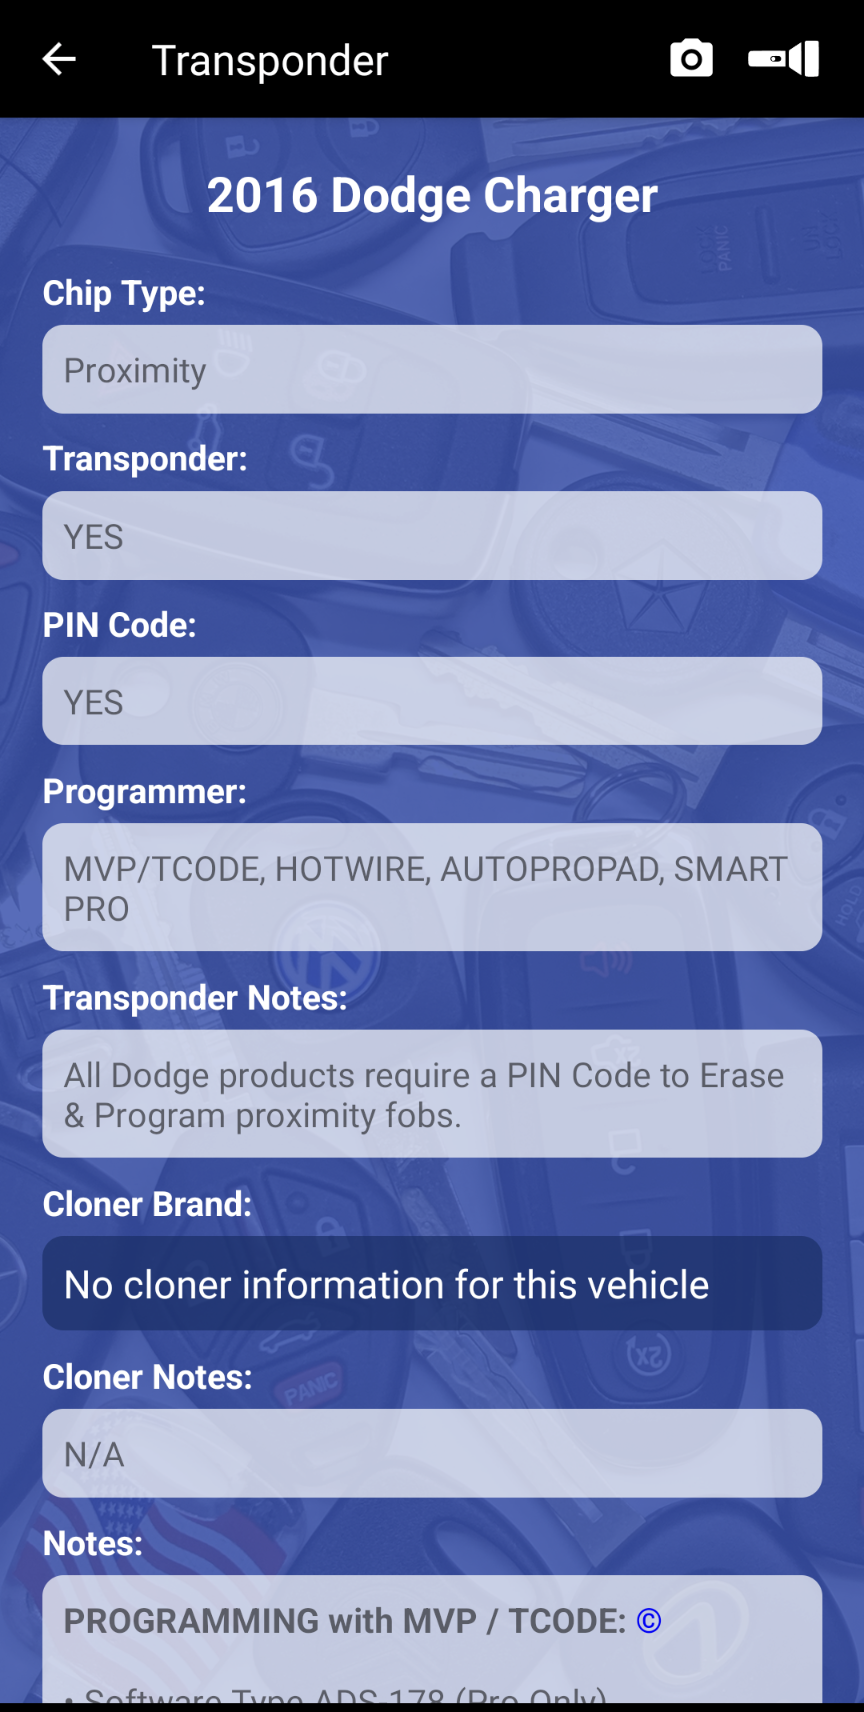 FIVE Pack of MyAutoSmart Mobile for the iPhone, iPad or Android Smartphone or Tablet - New User or Renewal - AutoSmart Advisor